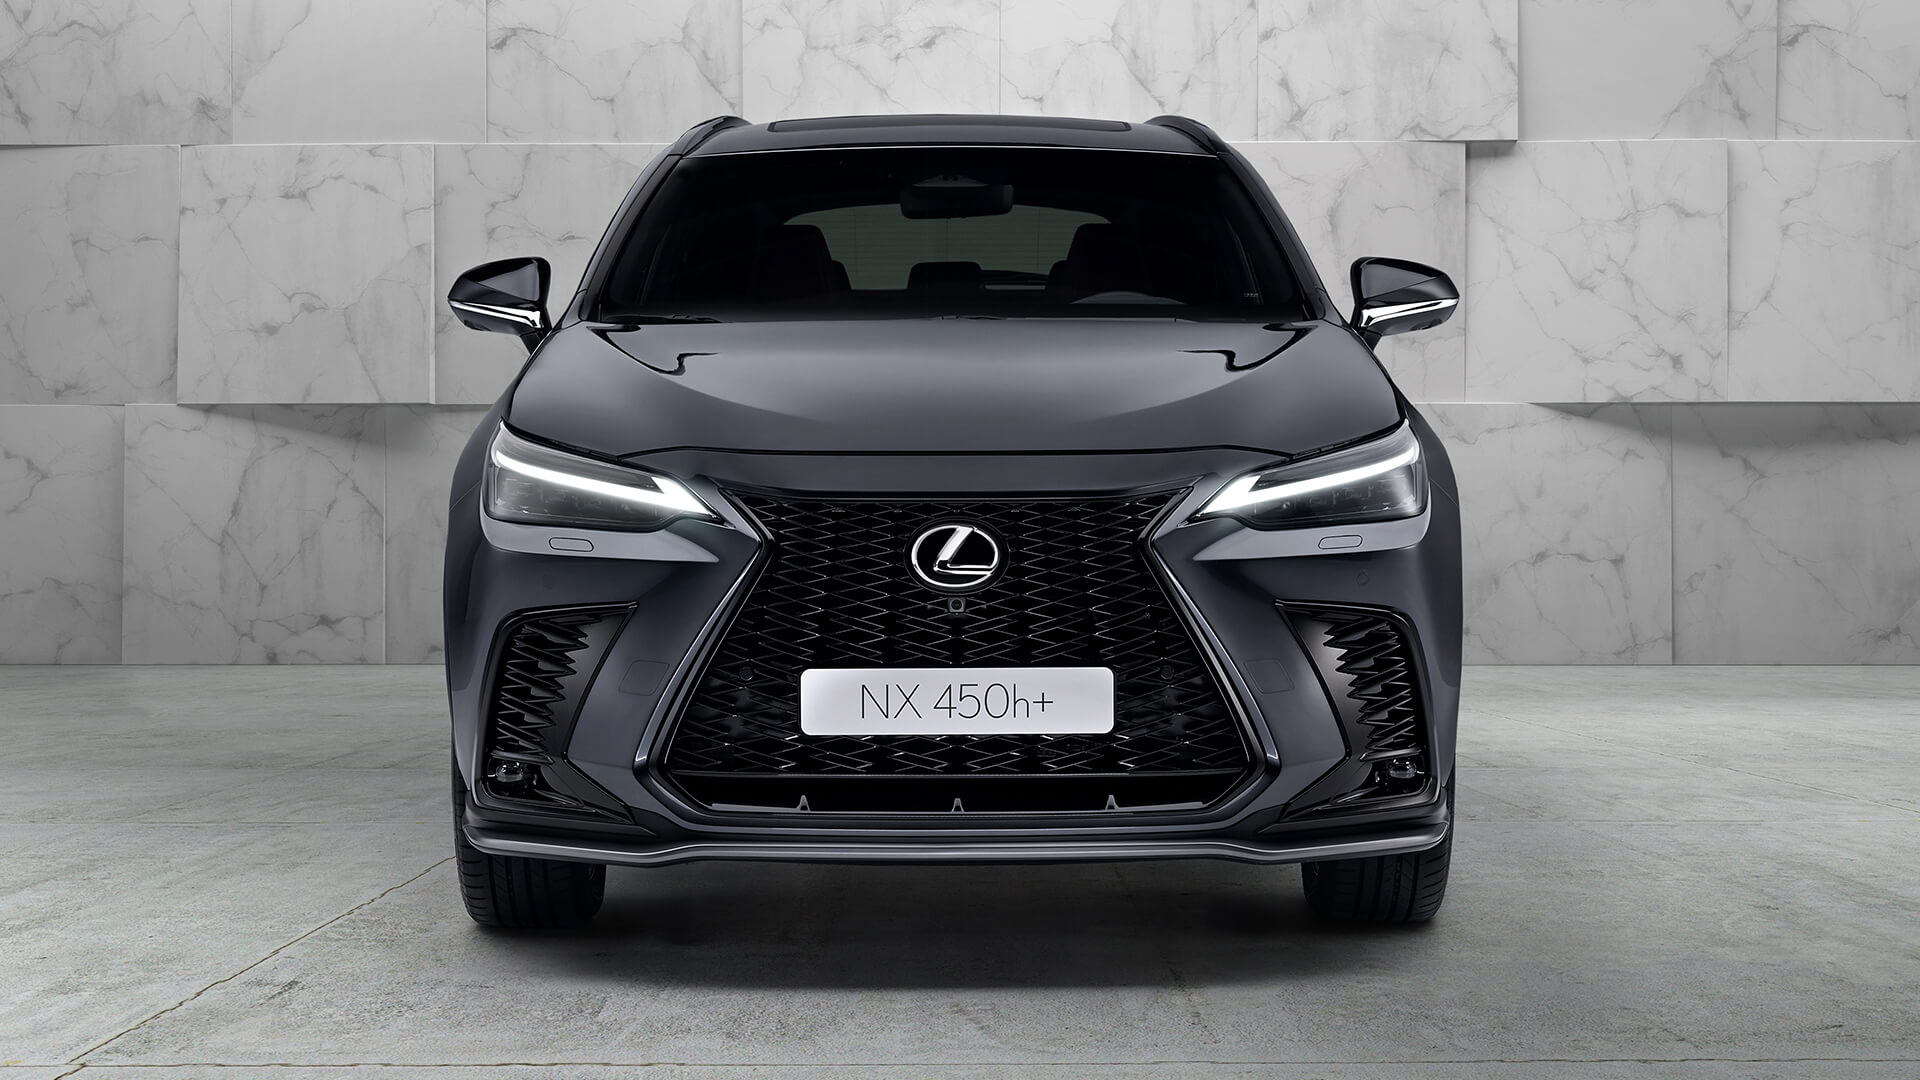 Front view of the Lexus NX 450h+